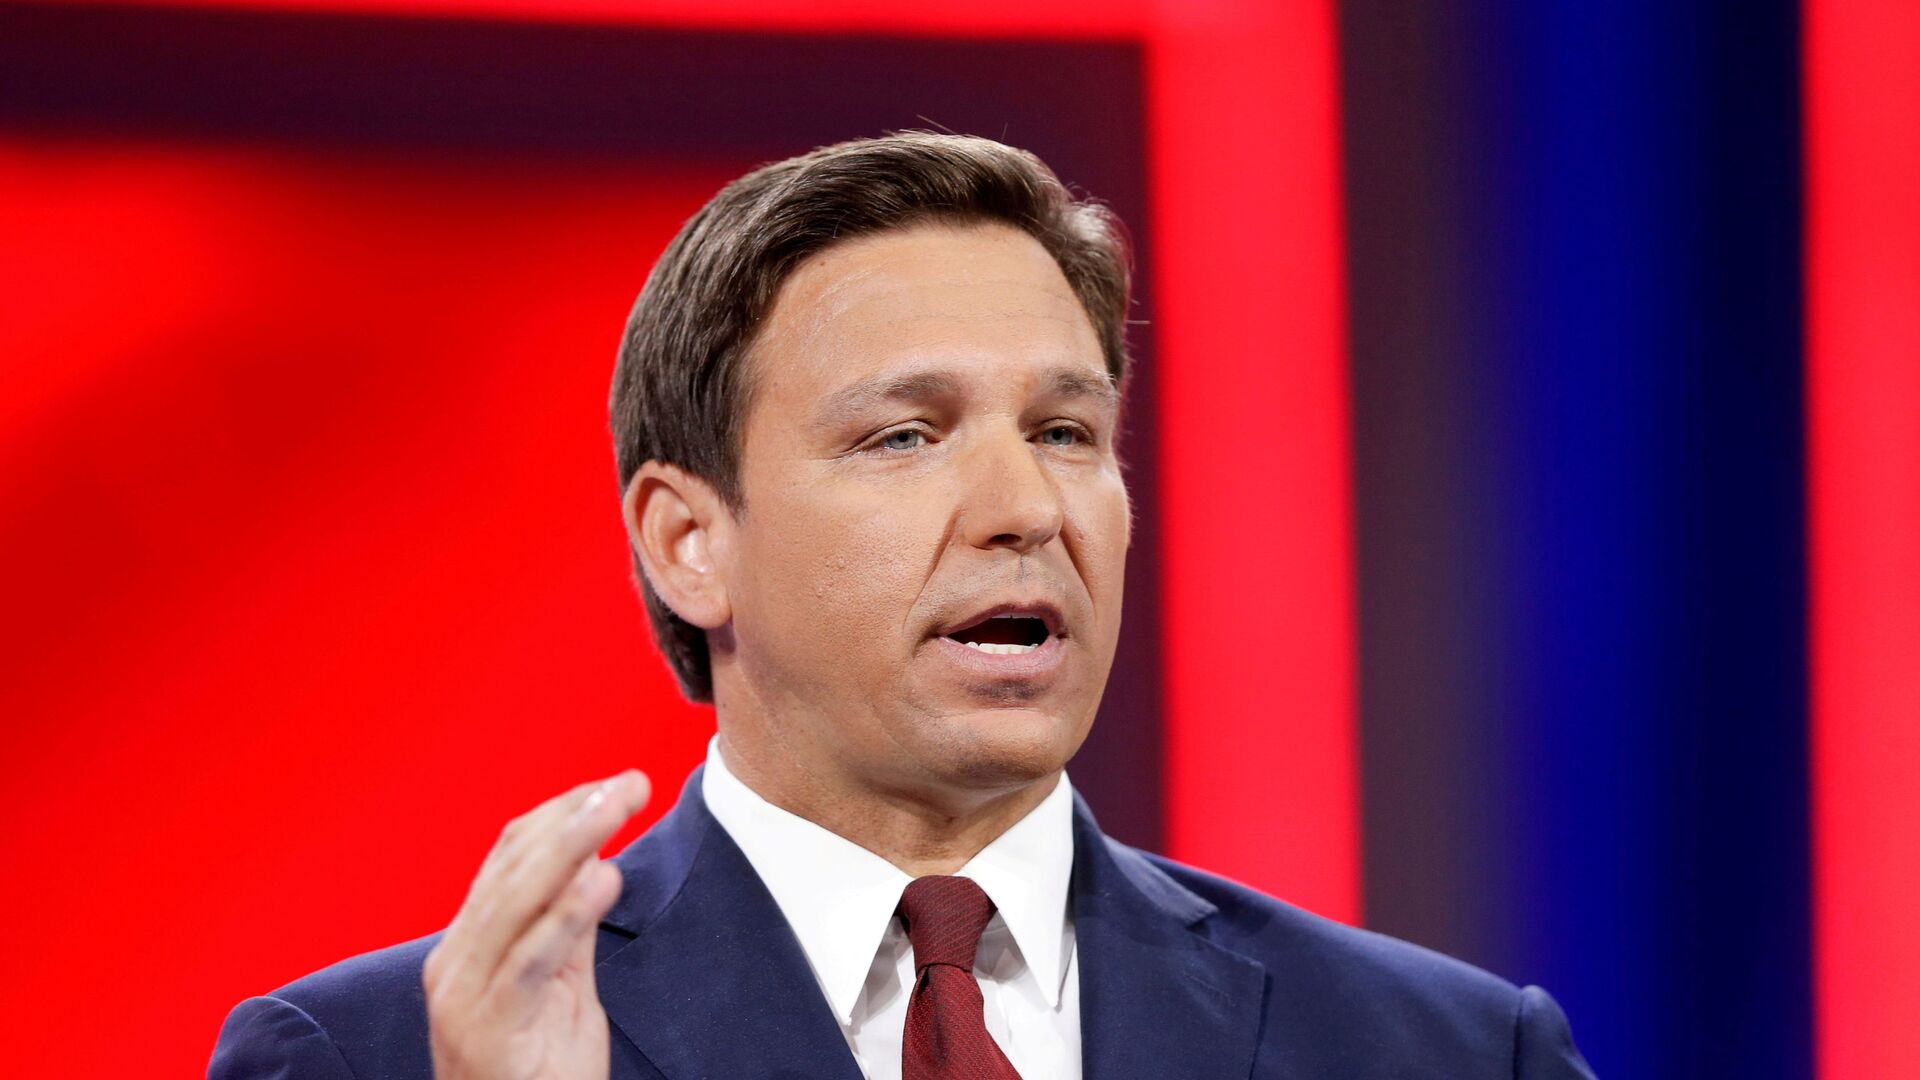 Florida Gov. Ron DeSantis speaks during the welcome segment of the Conservative Political Action Conference (CPAC) in Orlando, Florida, U.S. February 26, 2021 - Sputnik International, 1920, 28.10.2021